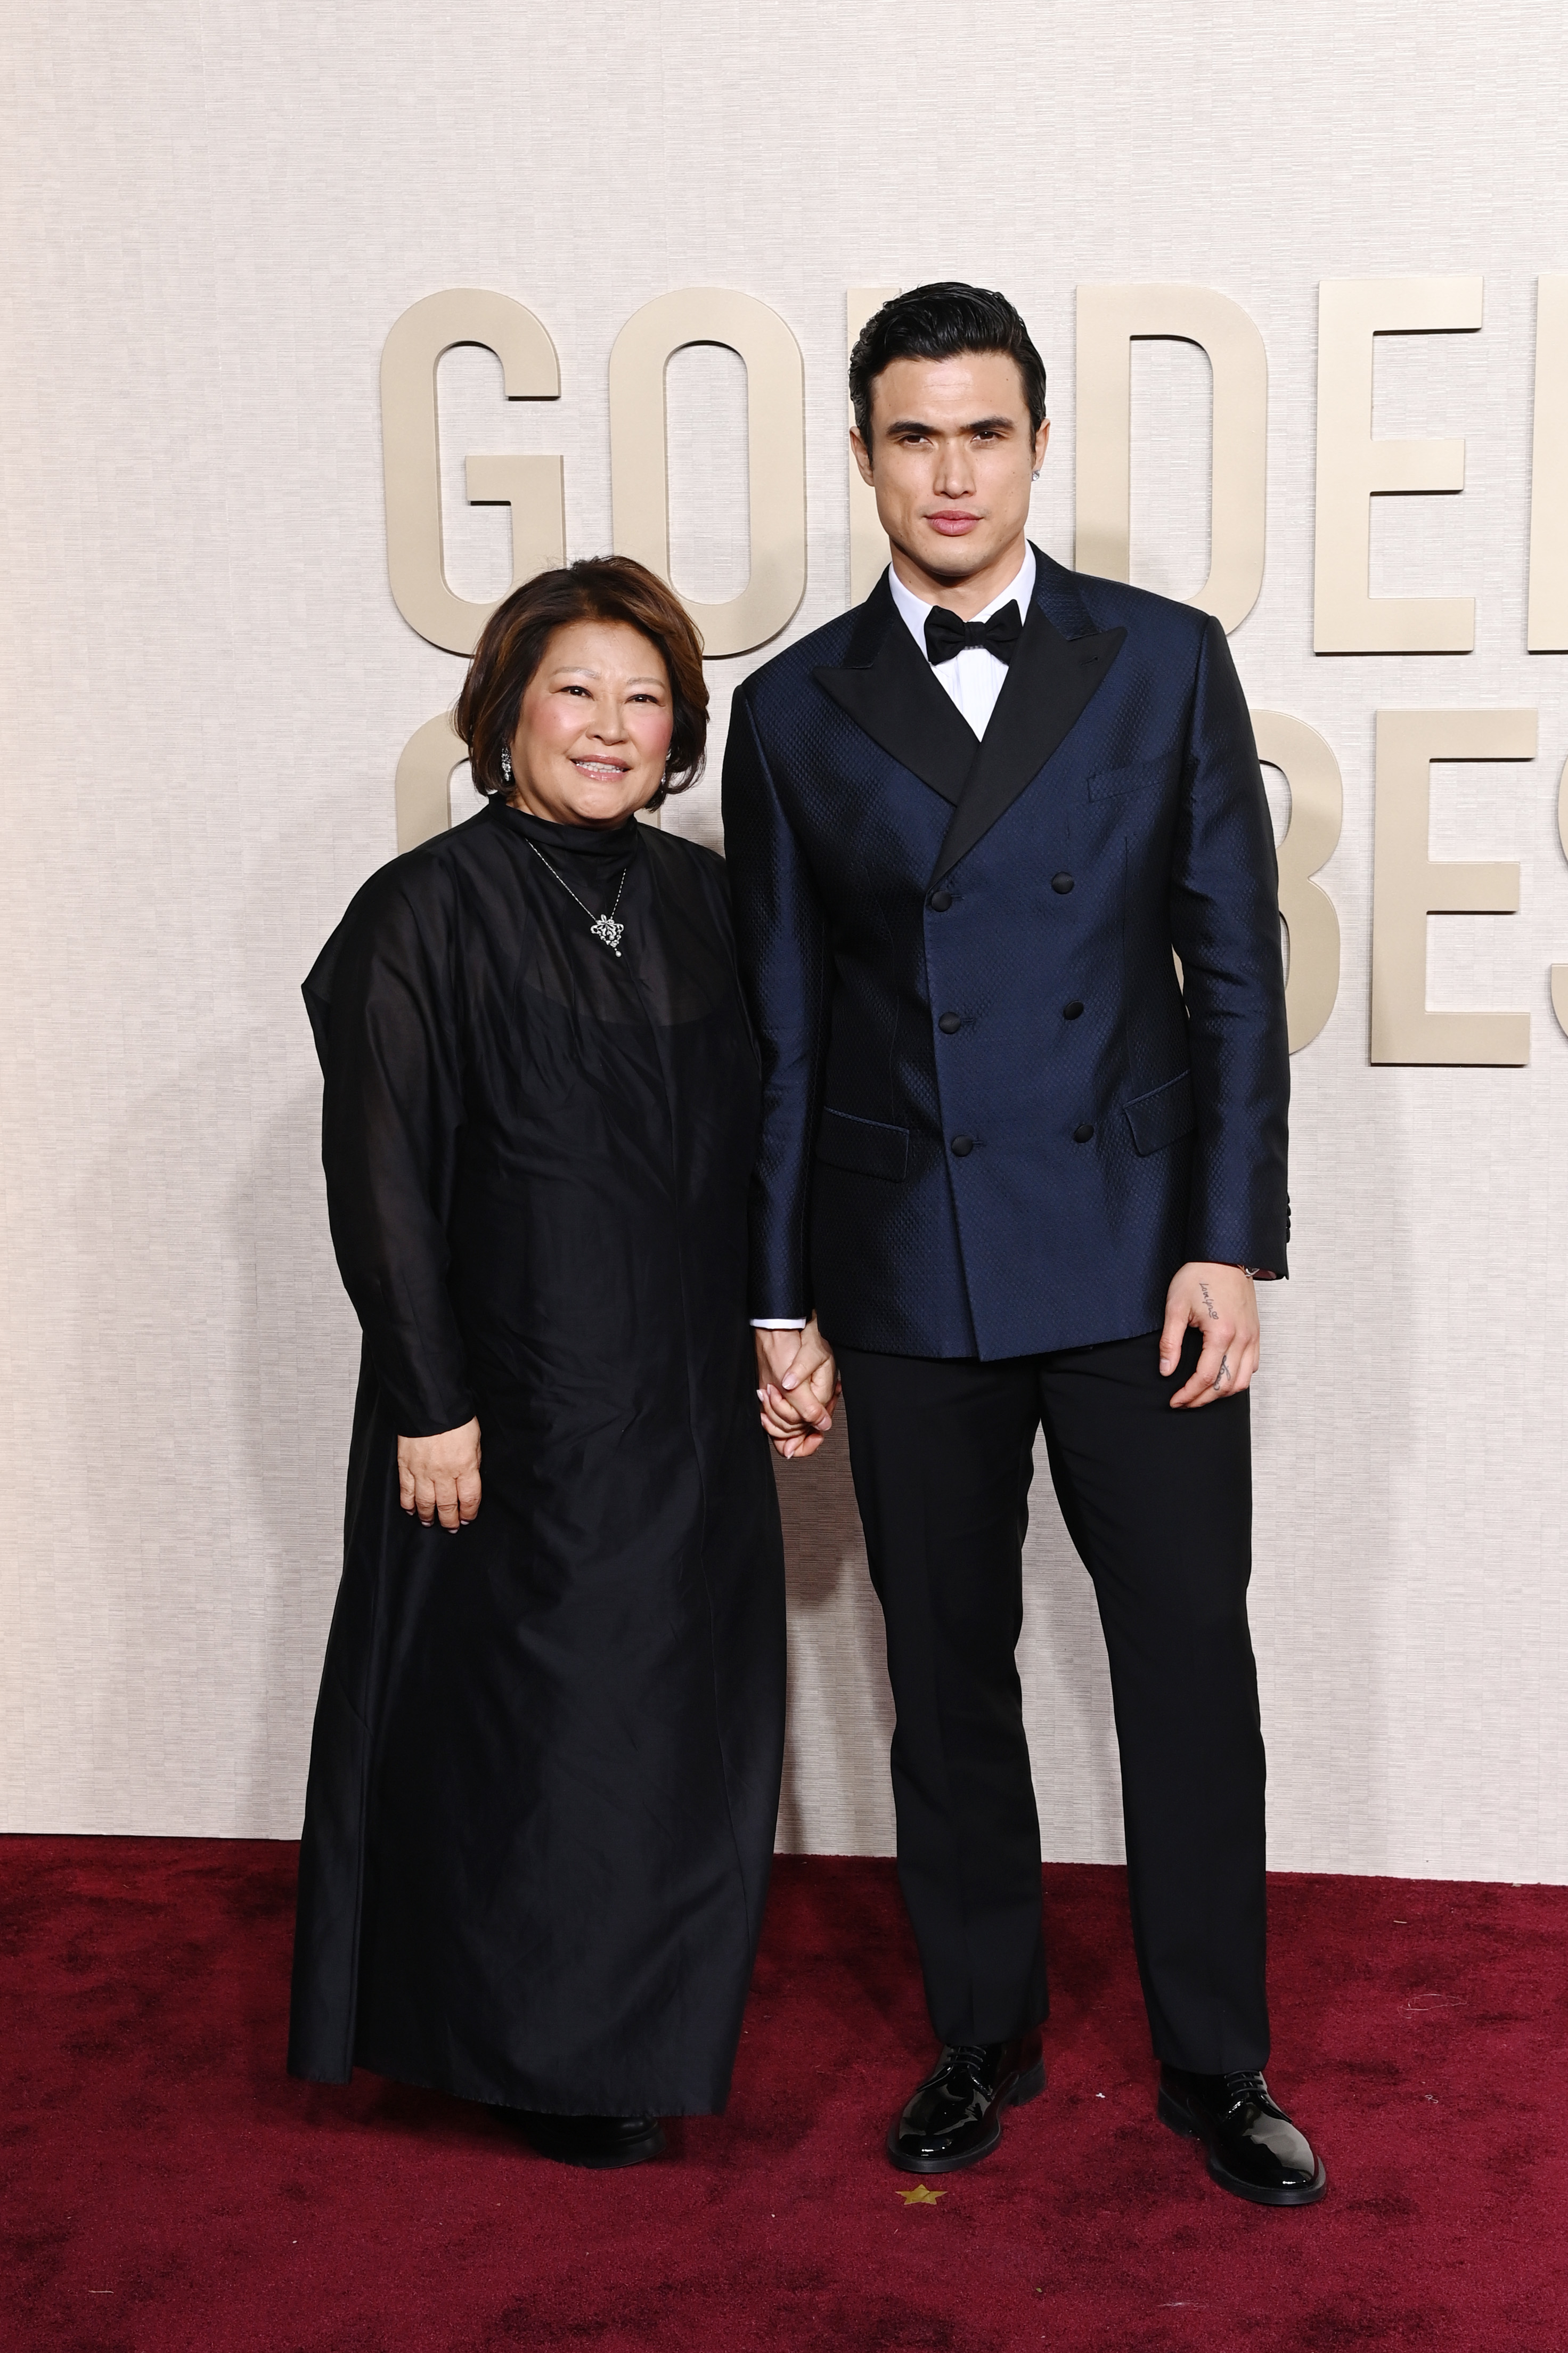 Sukyong and Charles Melton holding hands on the red carpet